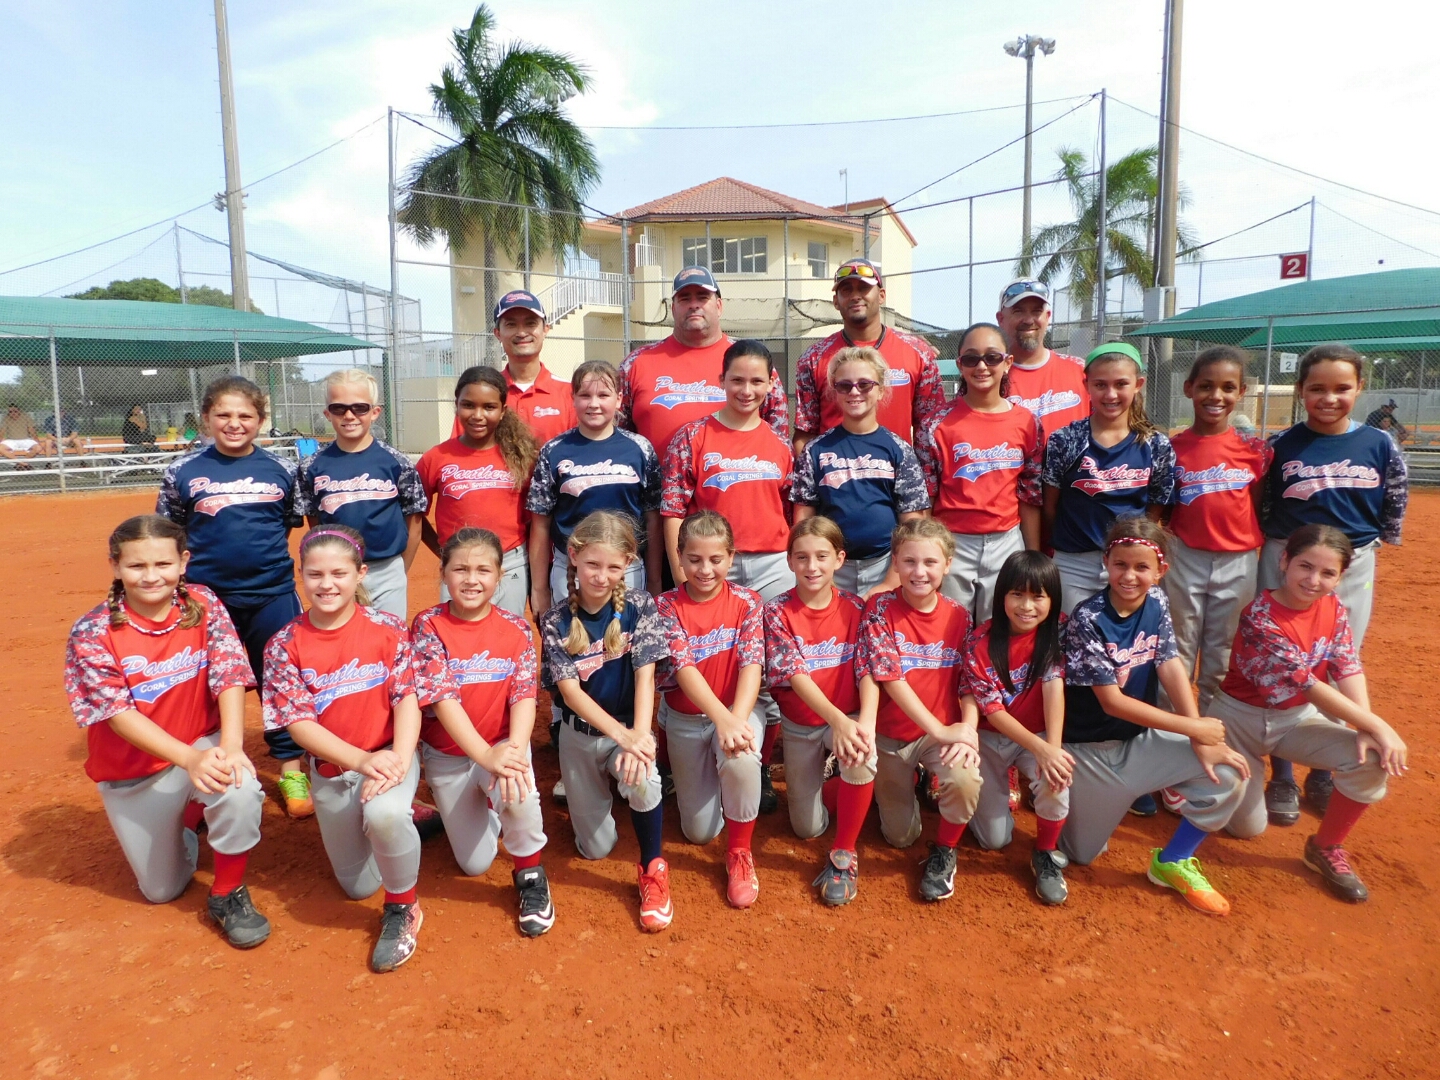 Youth Softball Association of Coral Springs Needs Your Support